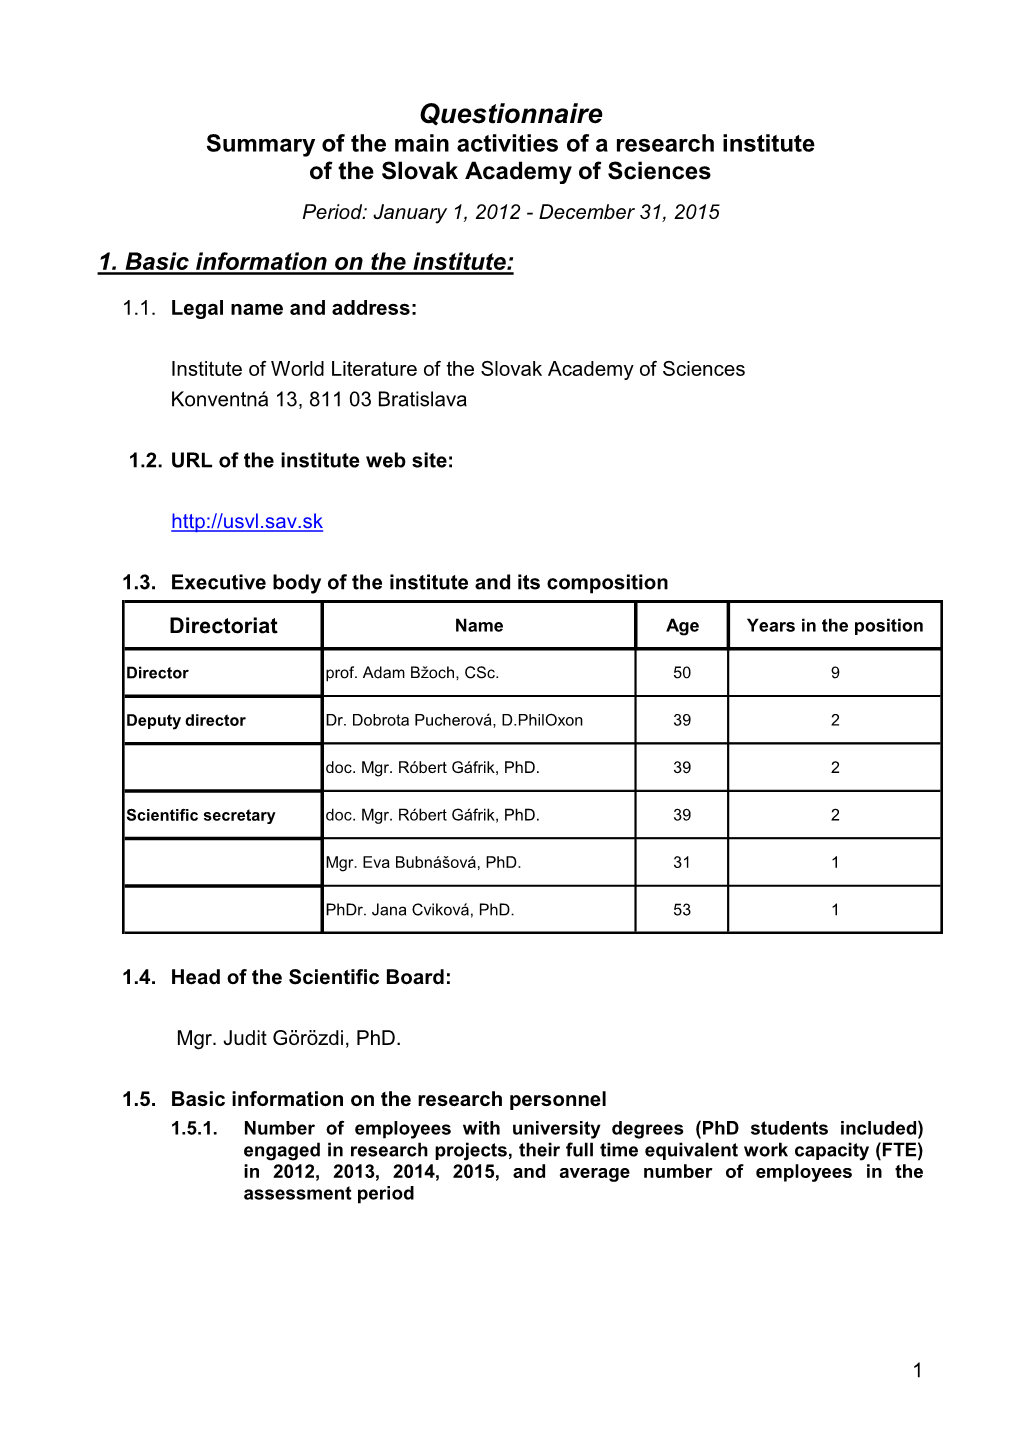 Questionnaire Summary of the Main Activities of a Research Institute of the Slovak Academy of Sciences